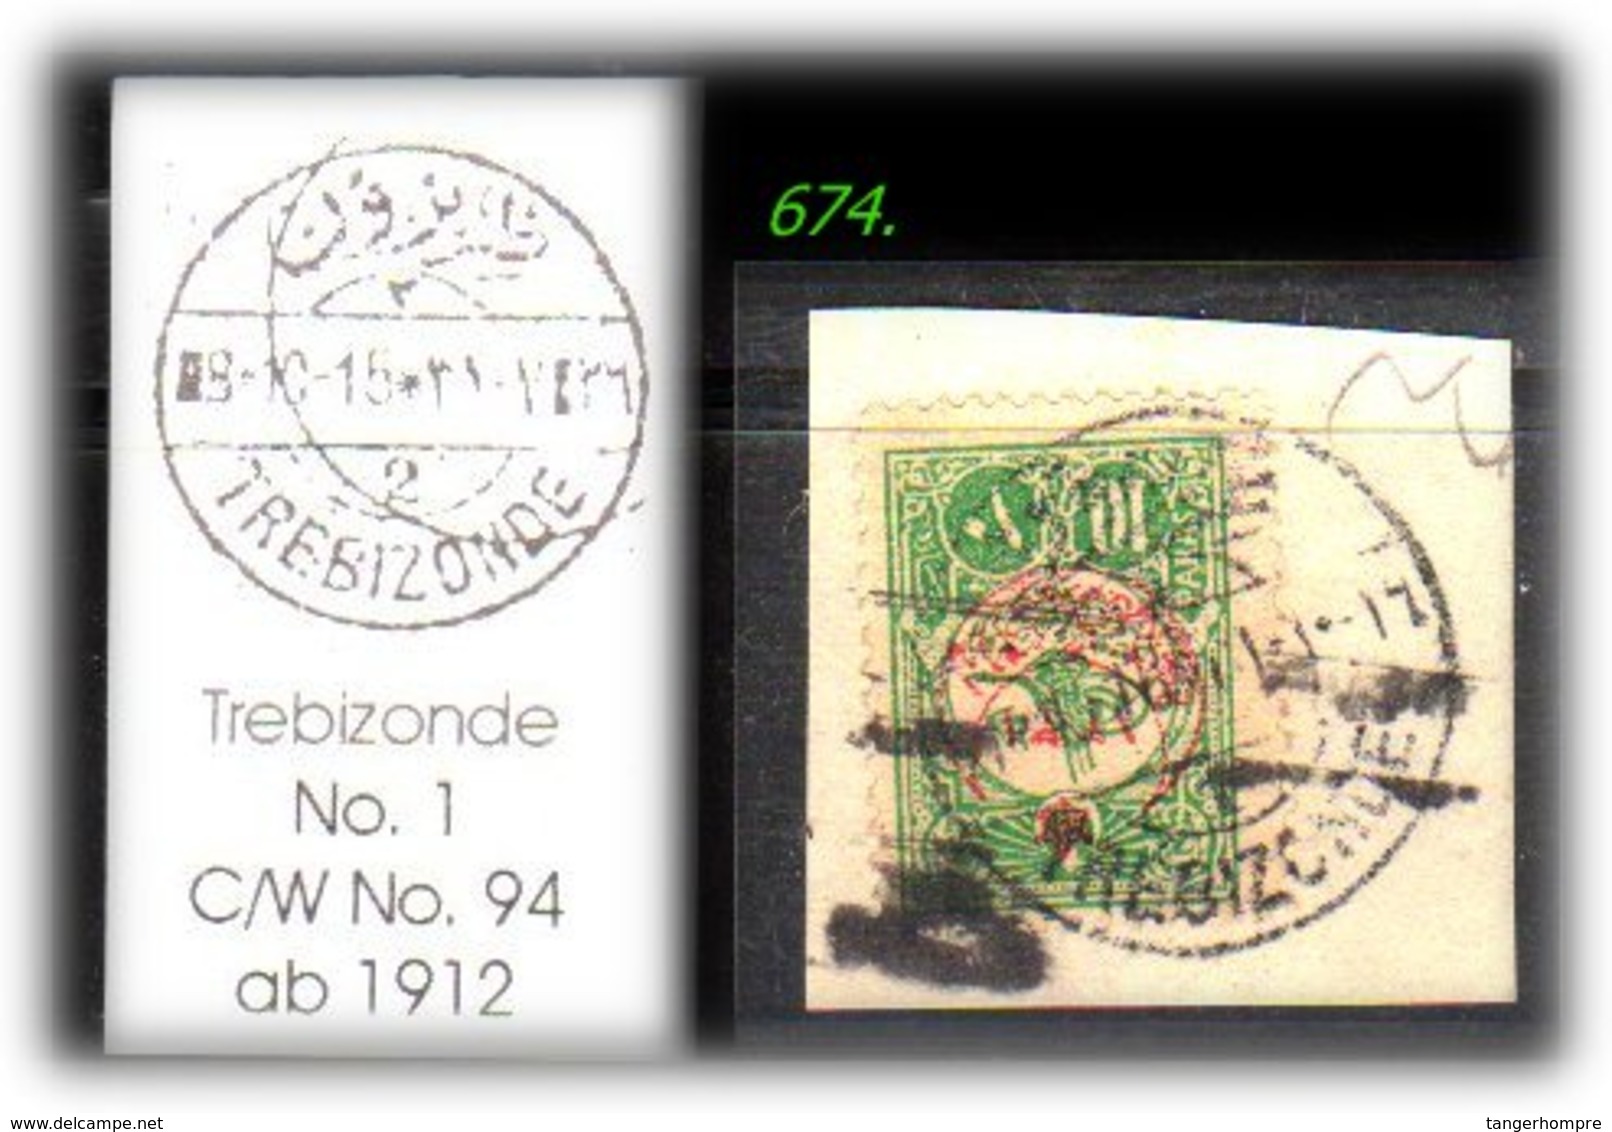 EARLY OTTOMAN SPECIALIZED FOR SPECIALIST, SEE....Stempel - TREBIZONDE - Gebraucht